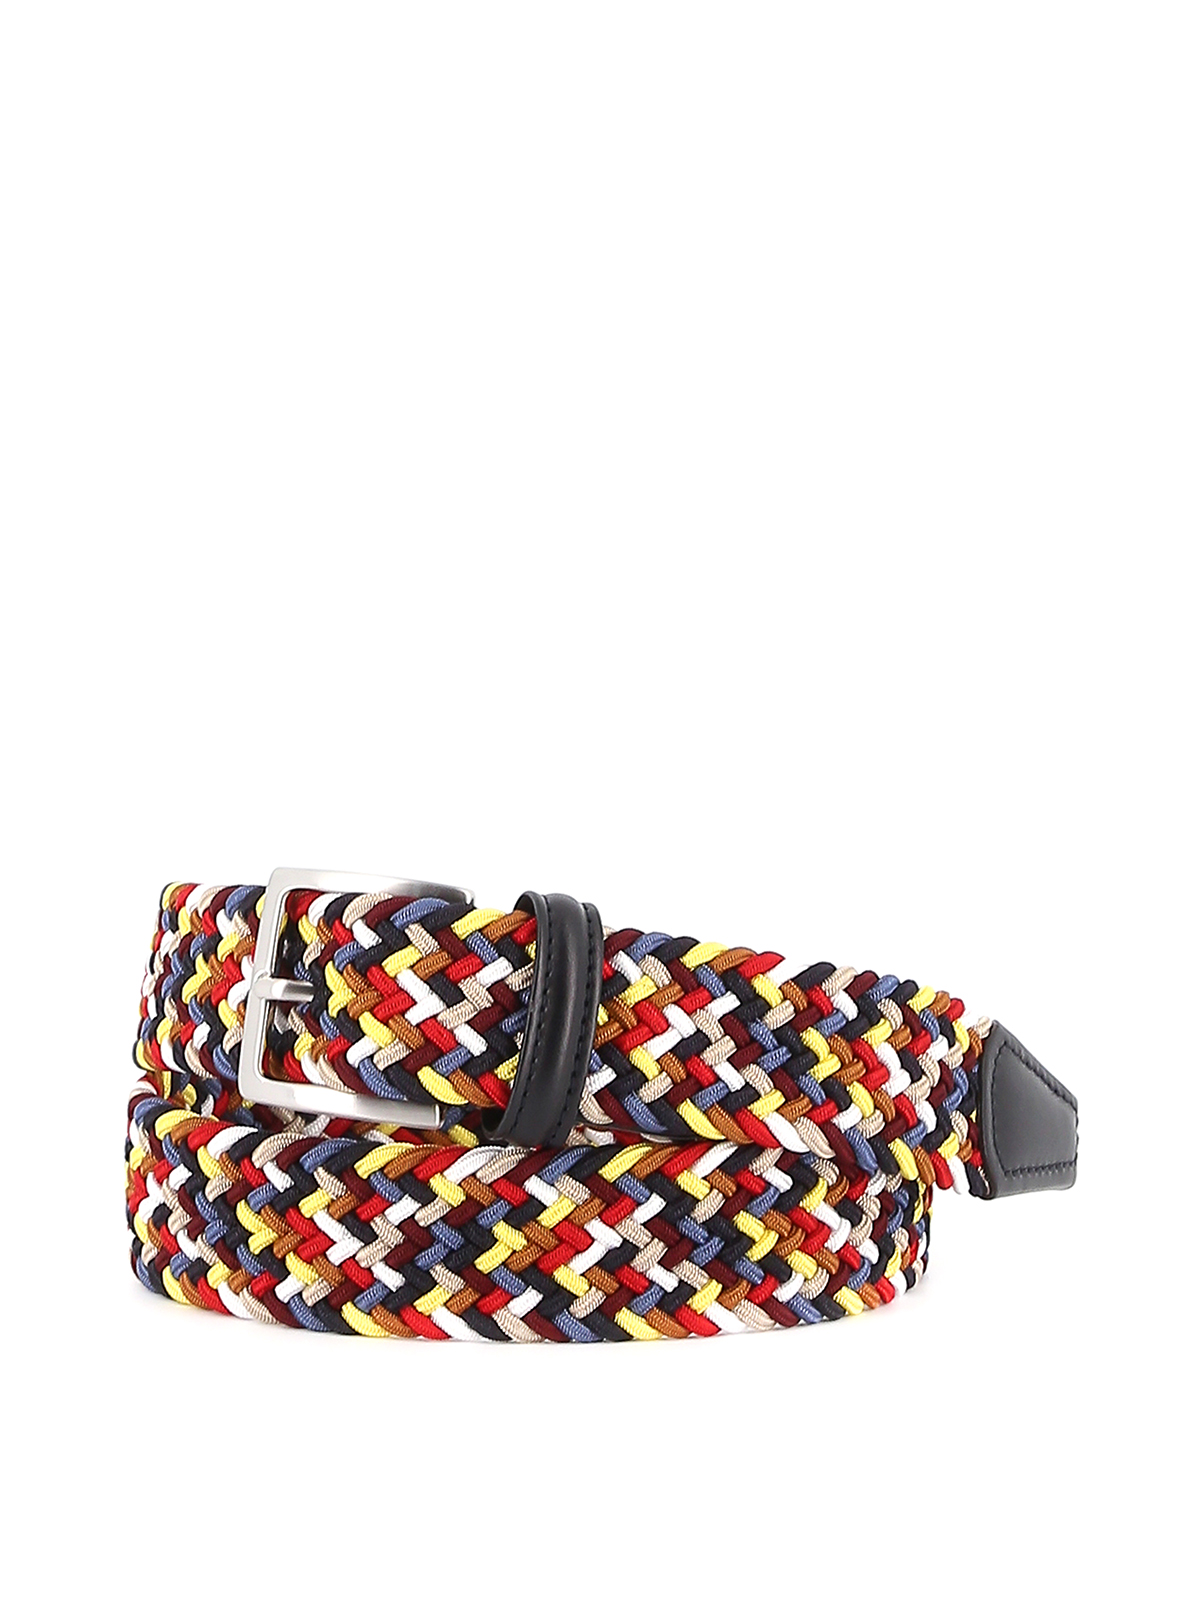 ANDERSON'S HARLEQUIN STRETCH WOVEN BELT